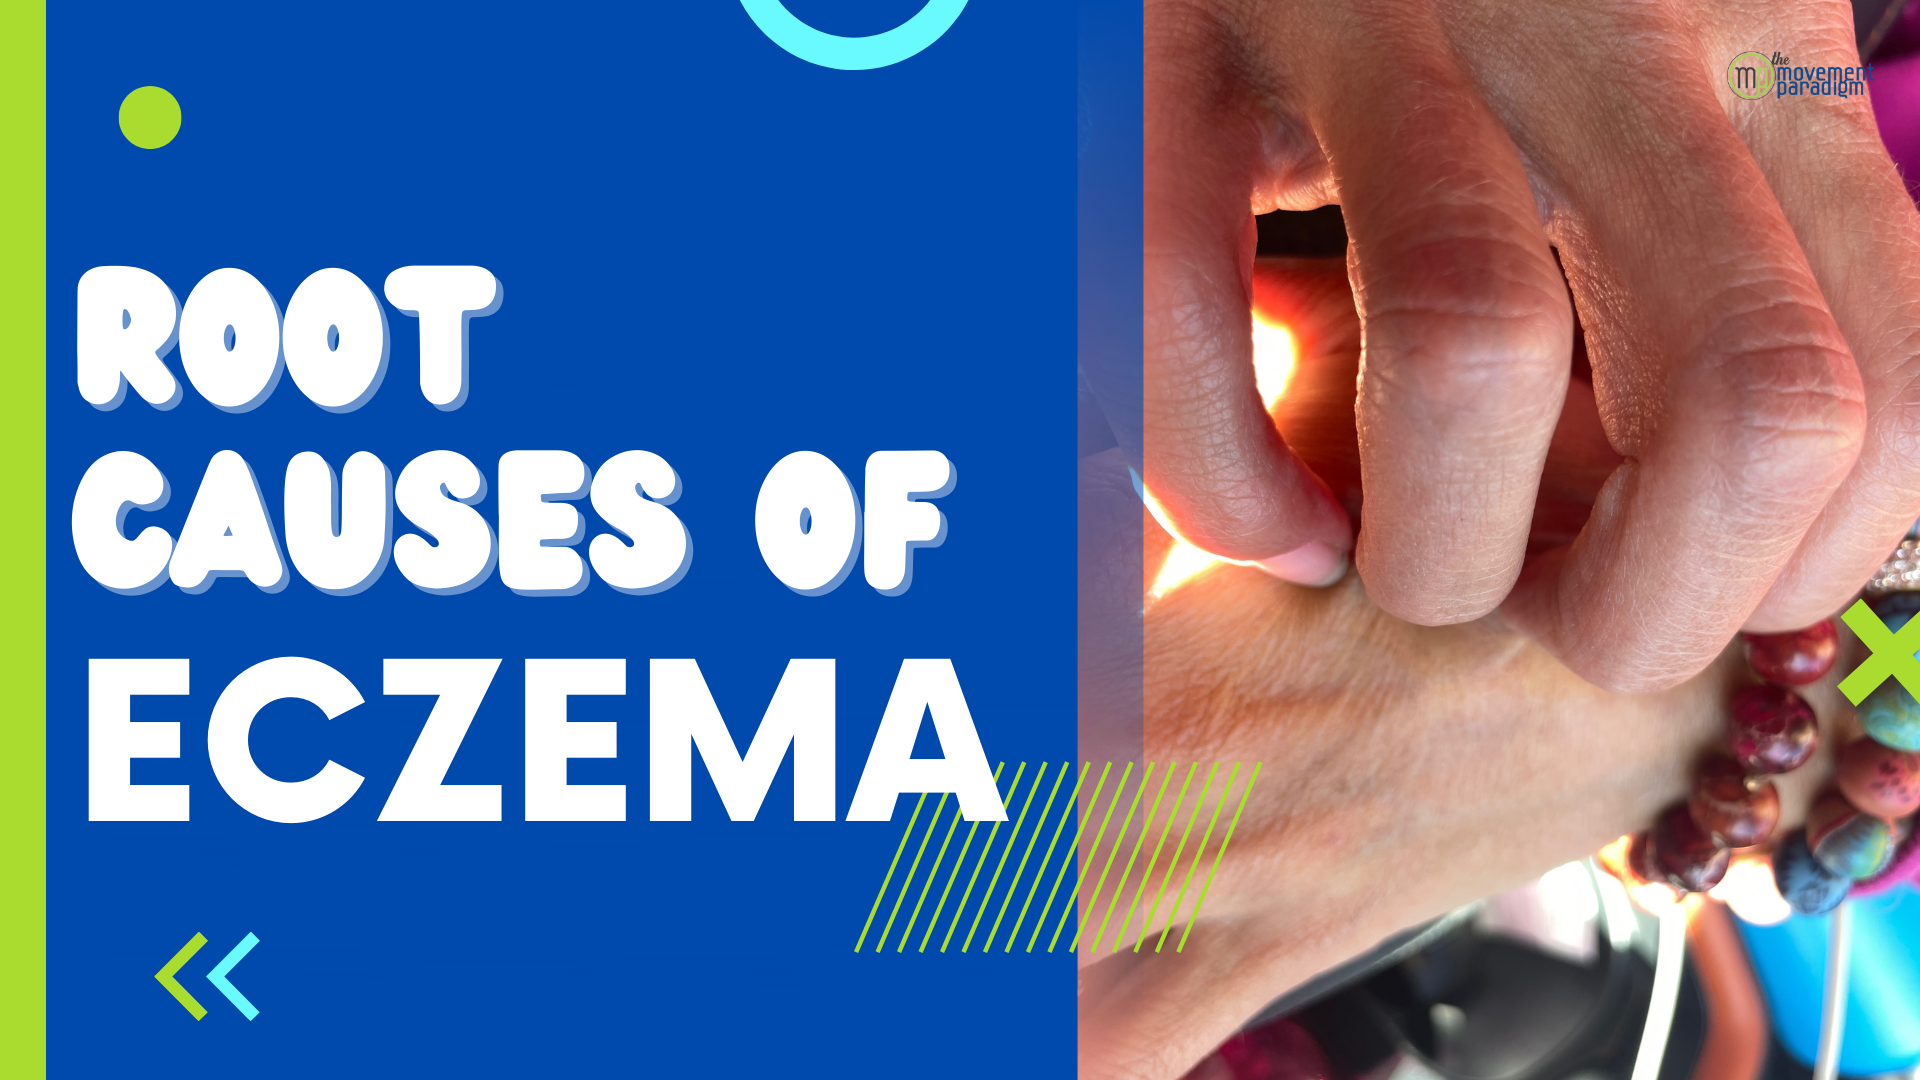 Are you experiencing eczema or you know someone who is? Did you know how intimately connected the microbiome is to eczema and how you can begin to take a look at root causes?